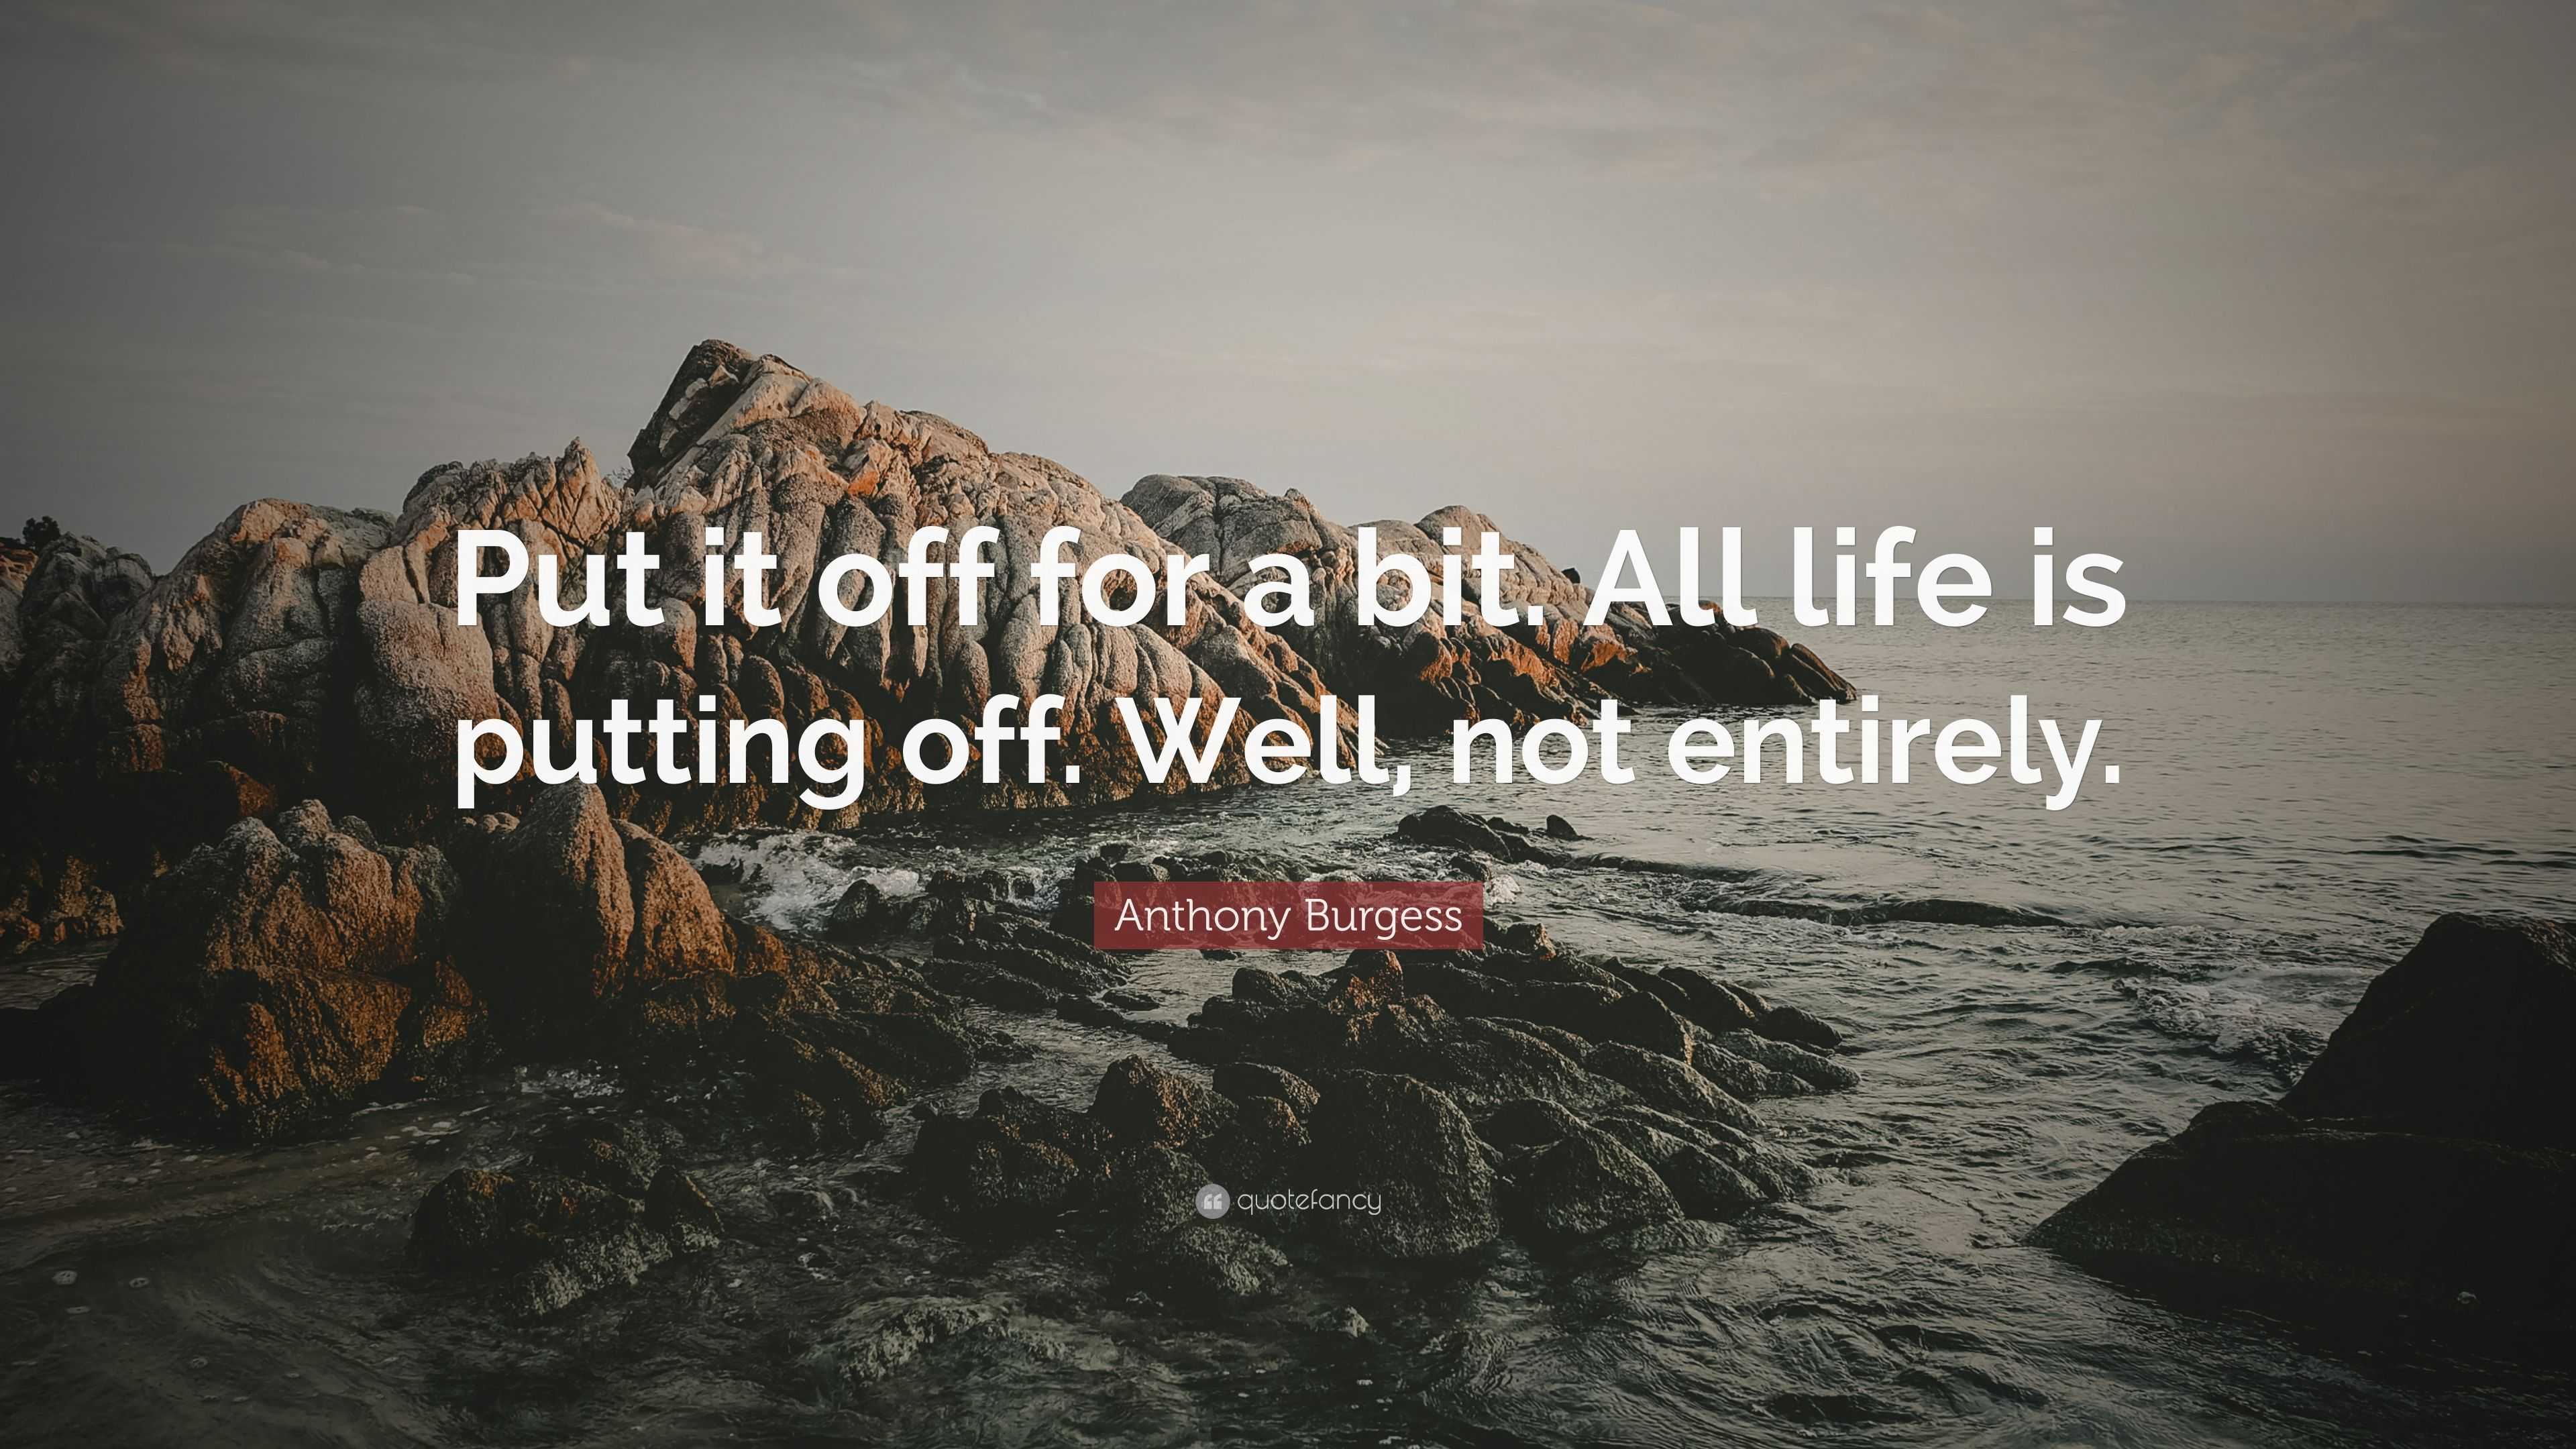 Anthony Burgess Quote: “Put it off for a bit. All life is putting off